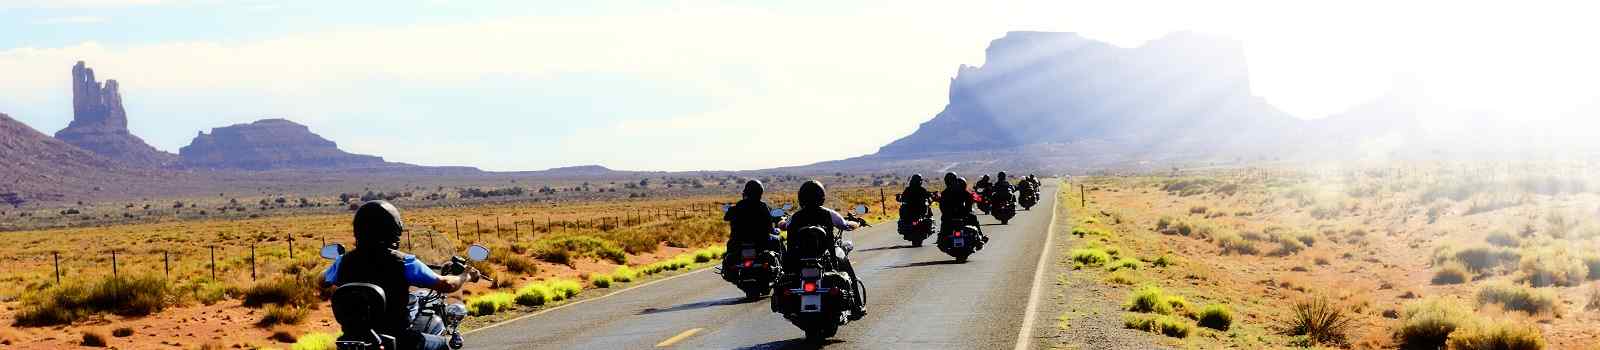 HARLEY-ATL-PAT Traveling in Monument Valley shutterstock 355385192